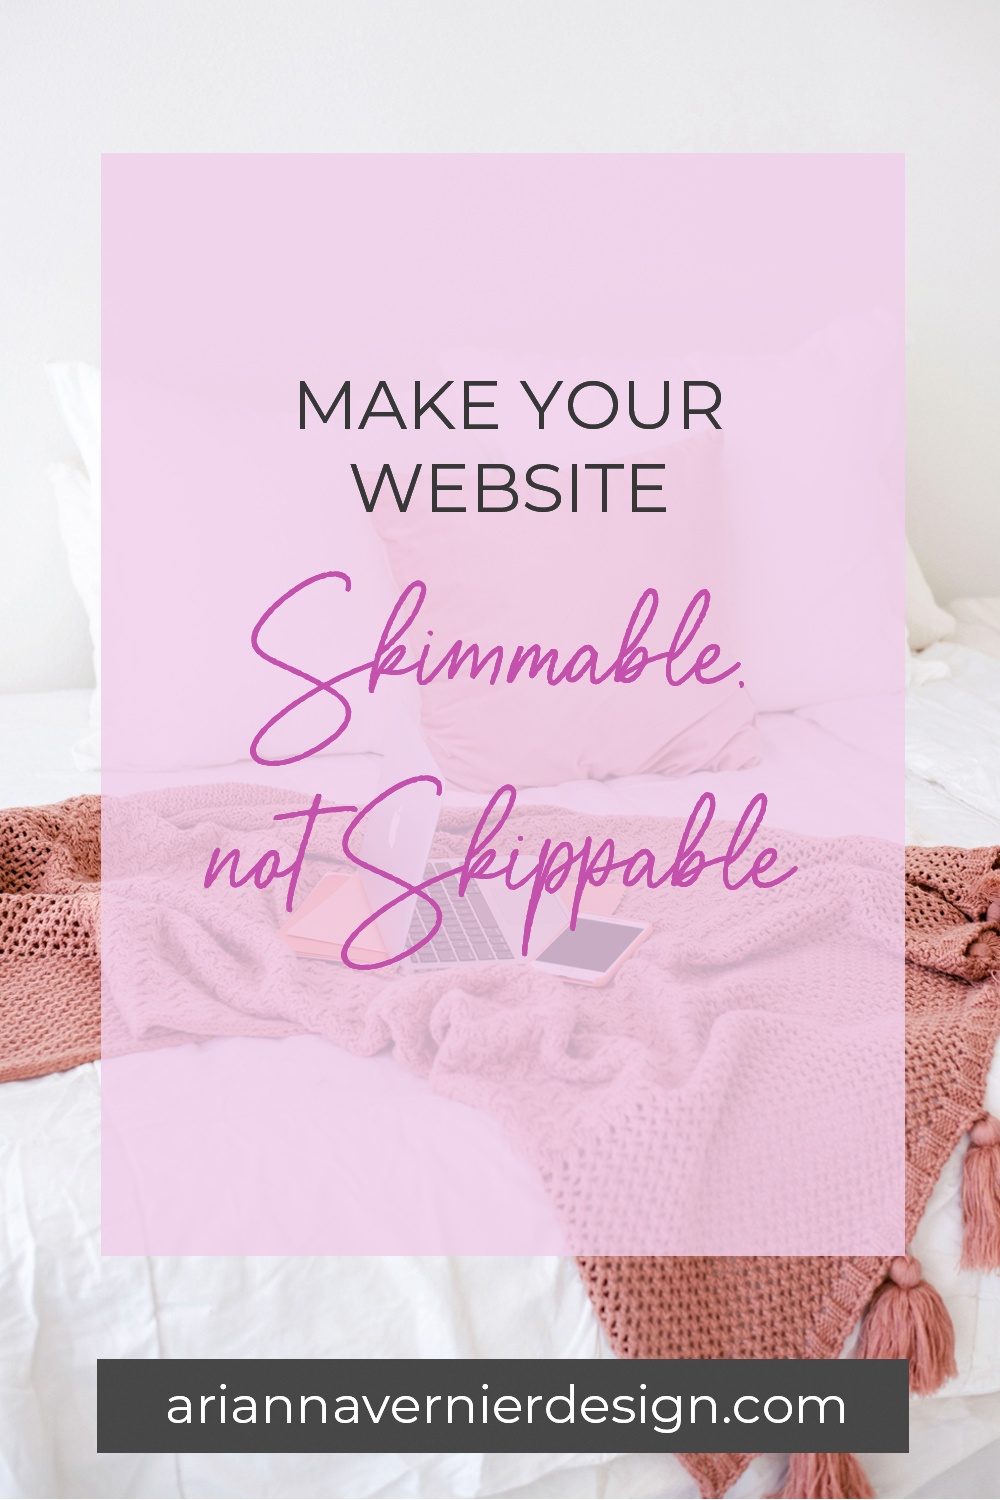 Pinterest pin with a laptop on a bed in the background, with a light purple rectangle over top, and the title "Make Your Website Skimmable, Not Skippable"